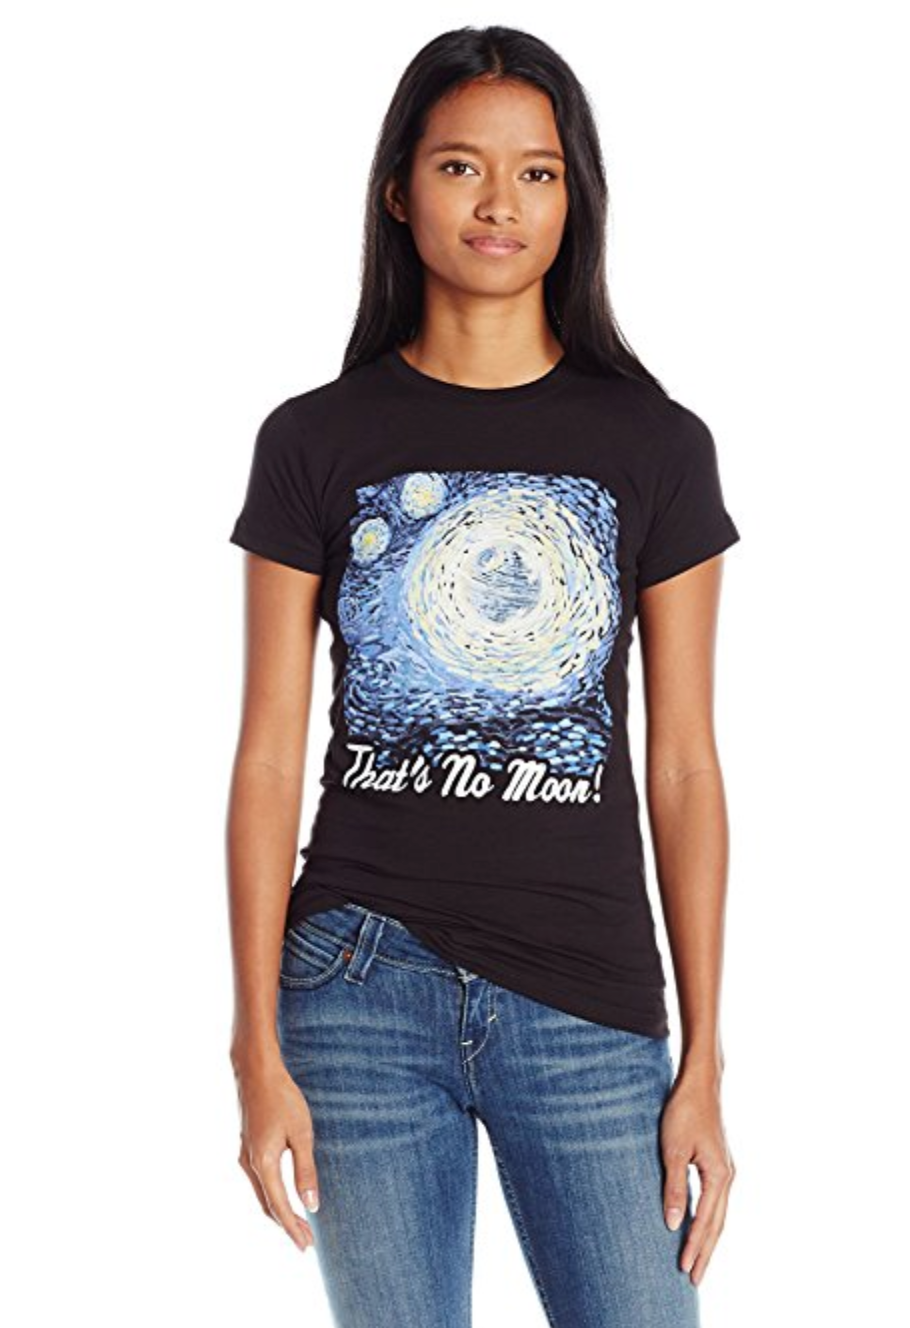 That's No Moon: Star Wars T-Shirt for Women